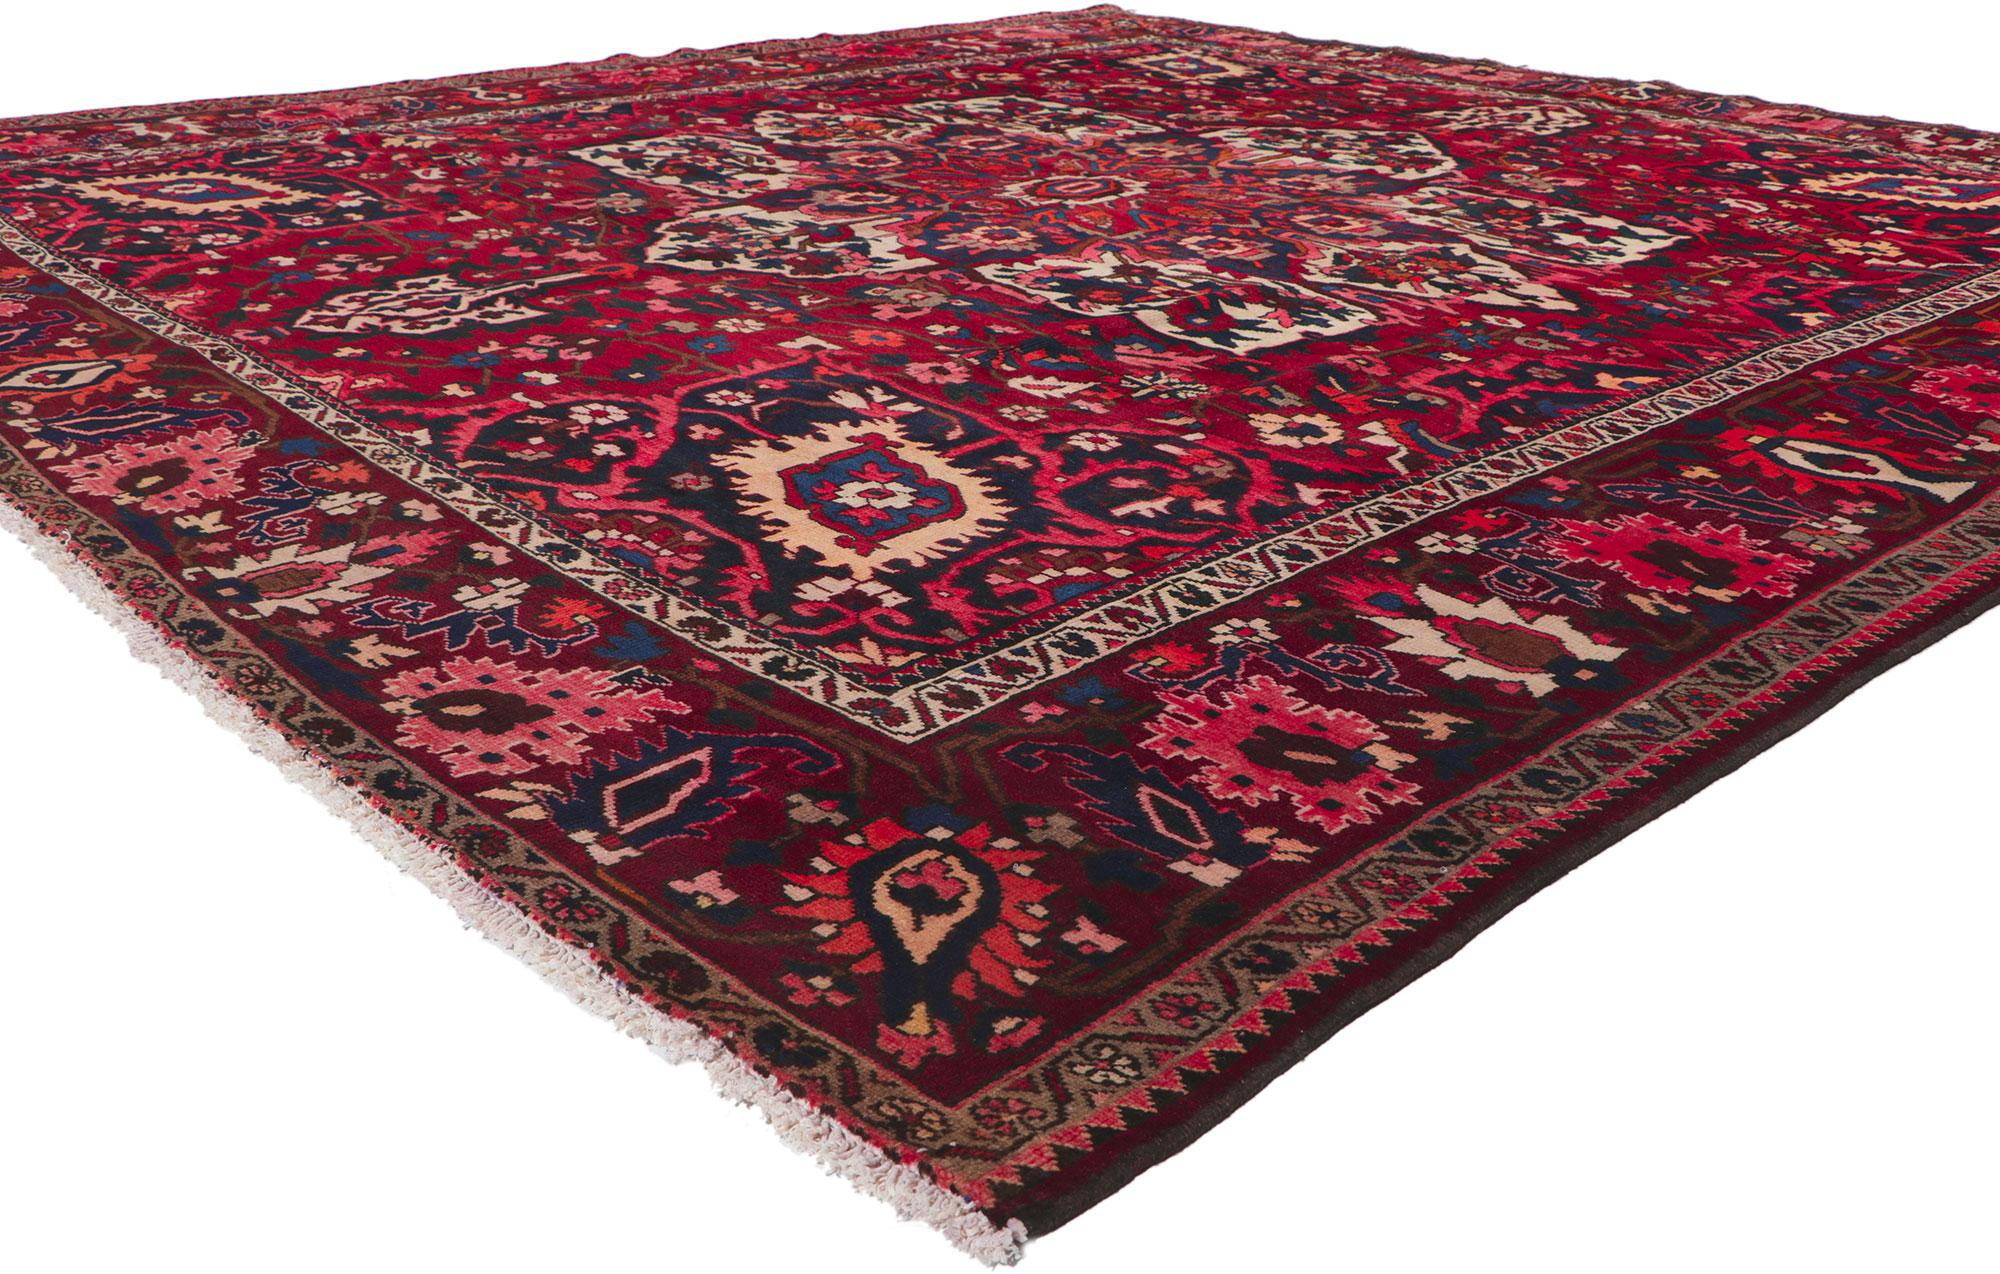 61118 Vintage Persian Bakhtiari Rug, 10'00 x 10'05.Emanating a timeless design and beguiling beauty in saturated colors, this hand-knotted wool vintage Persian Bakhtiari rug is poised to impress. Taking center stage is a large eight-point central